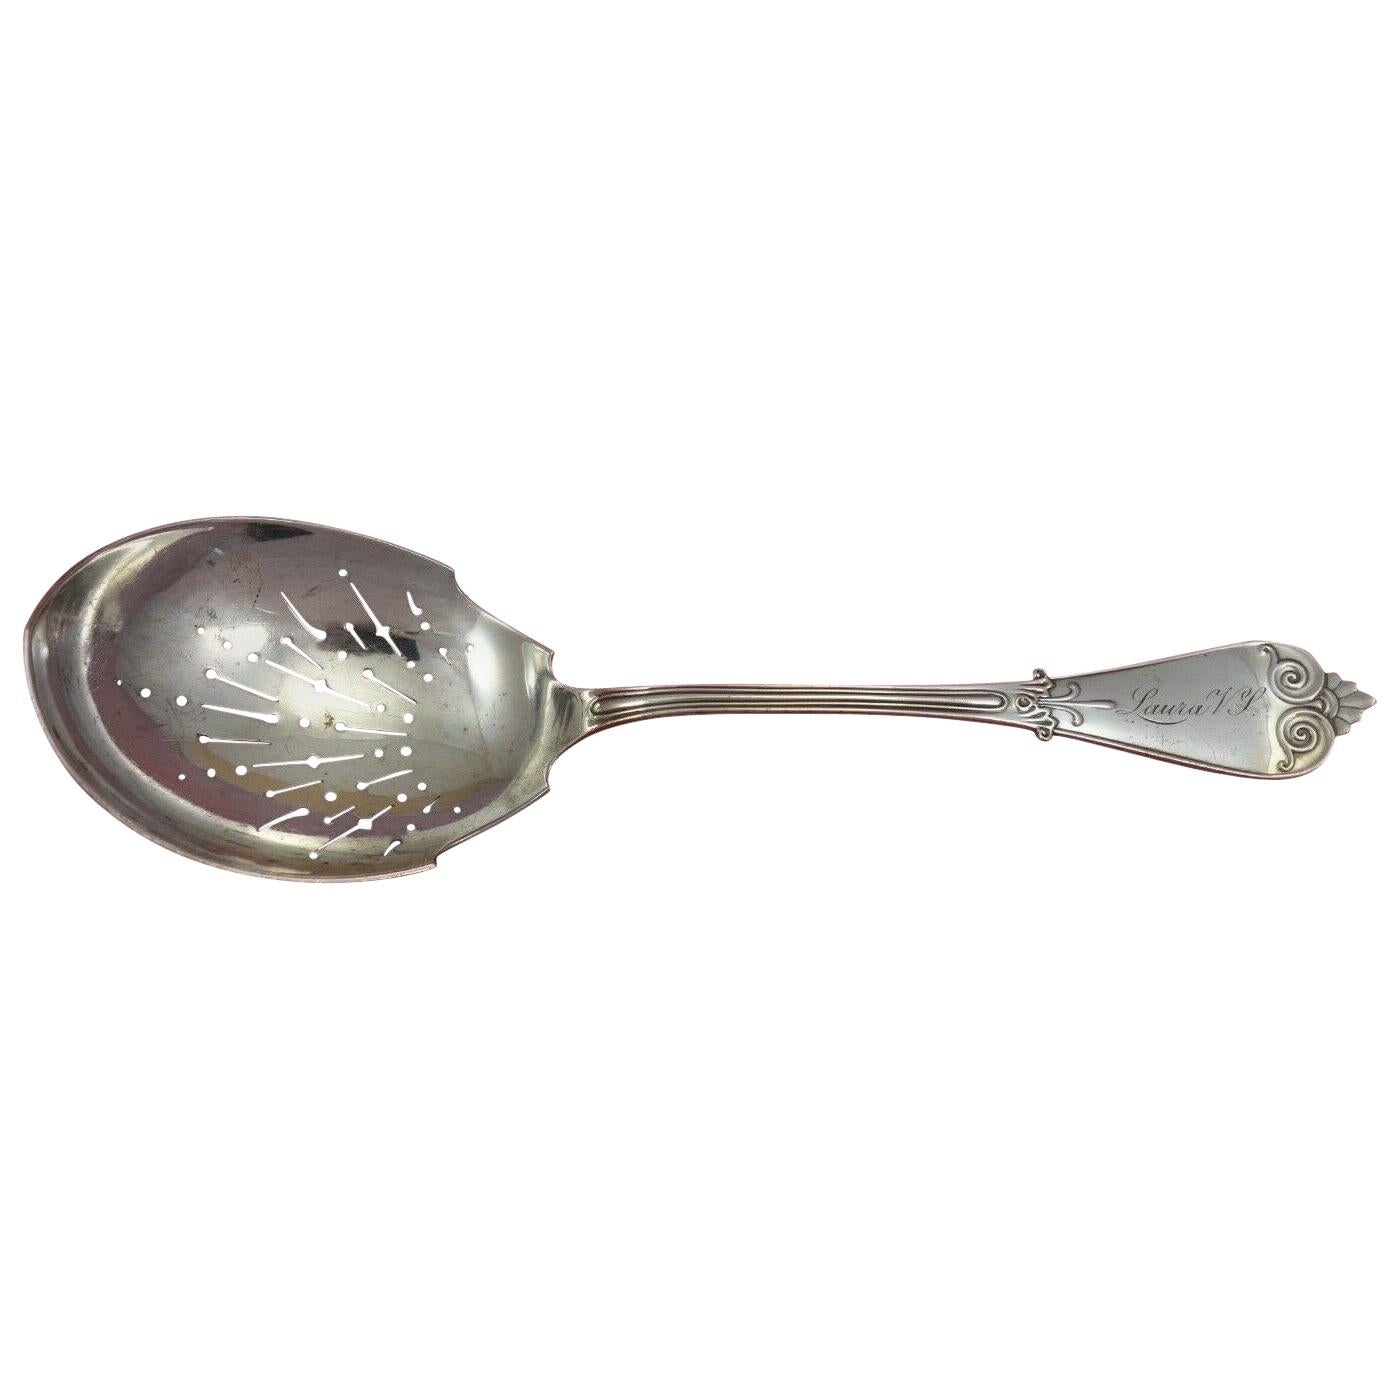 Beekman by Tiffany & Co. Sterling Silver Pea Spoon Serving, Antique